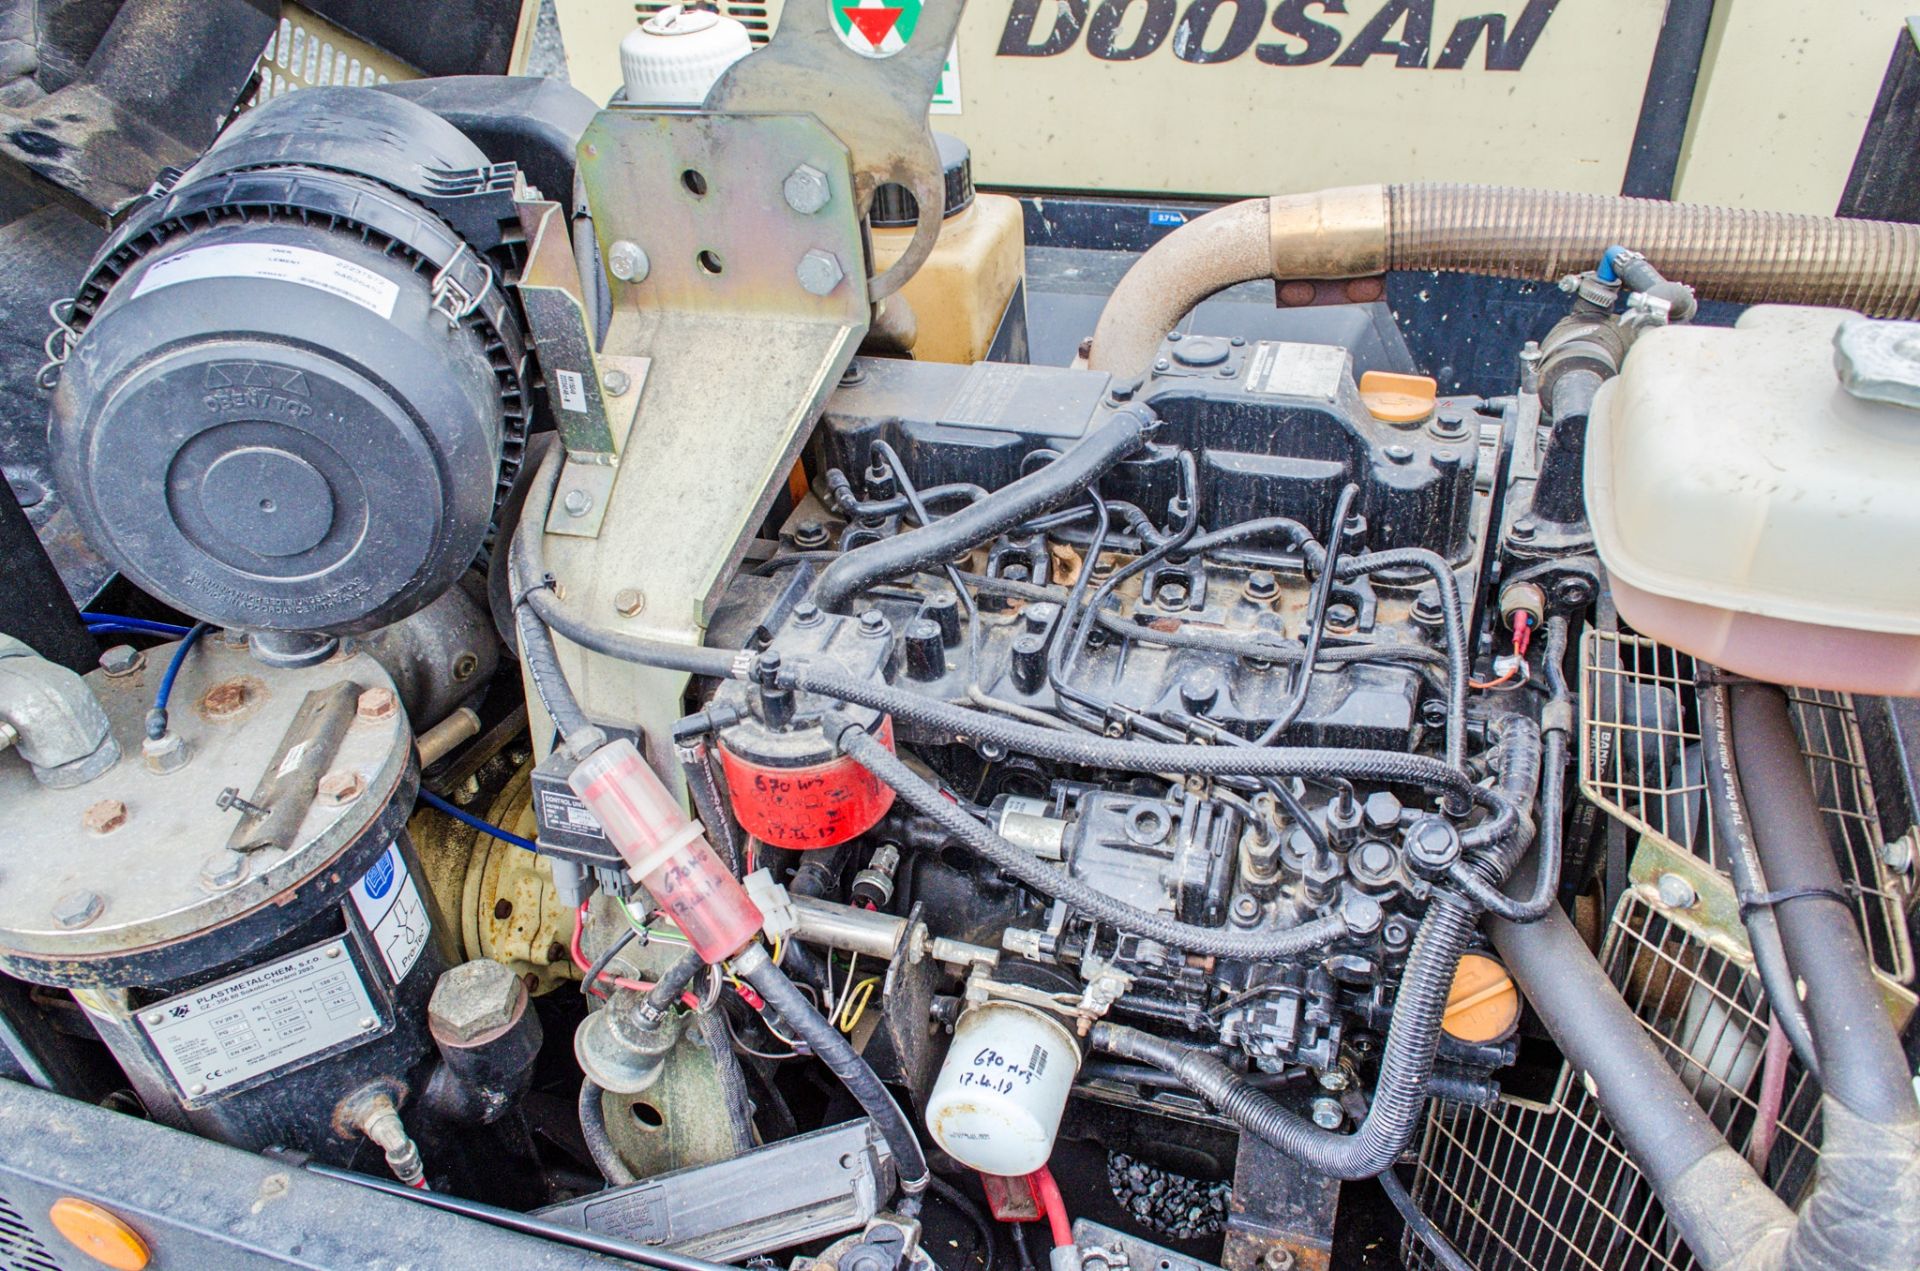 Doosan 741E diesel driven mobile air compressor/generator Year: 2015 S/N: 433552 Recorded Hours: 889 - Image 3 of 4